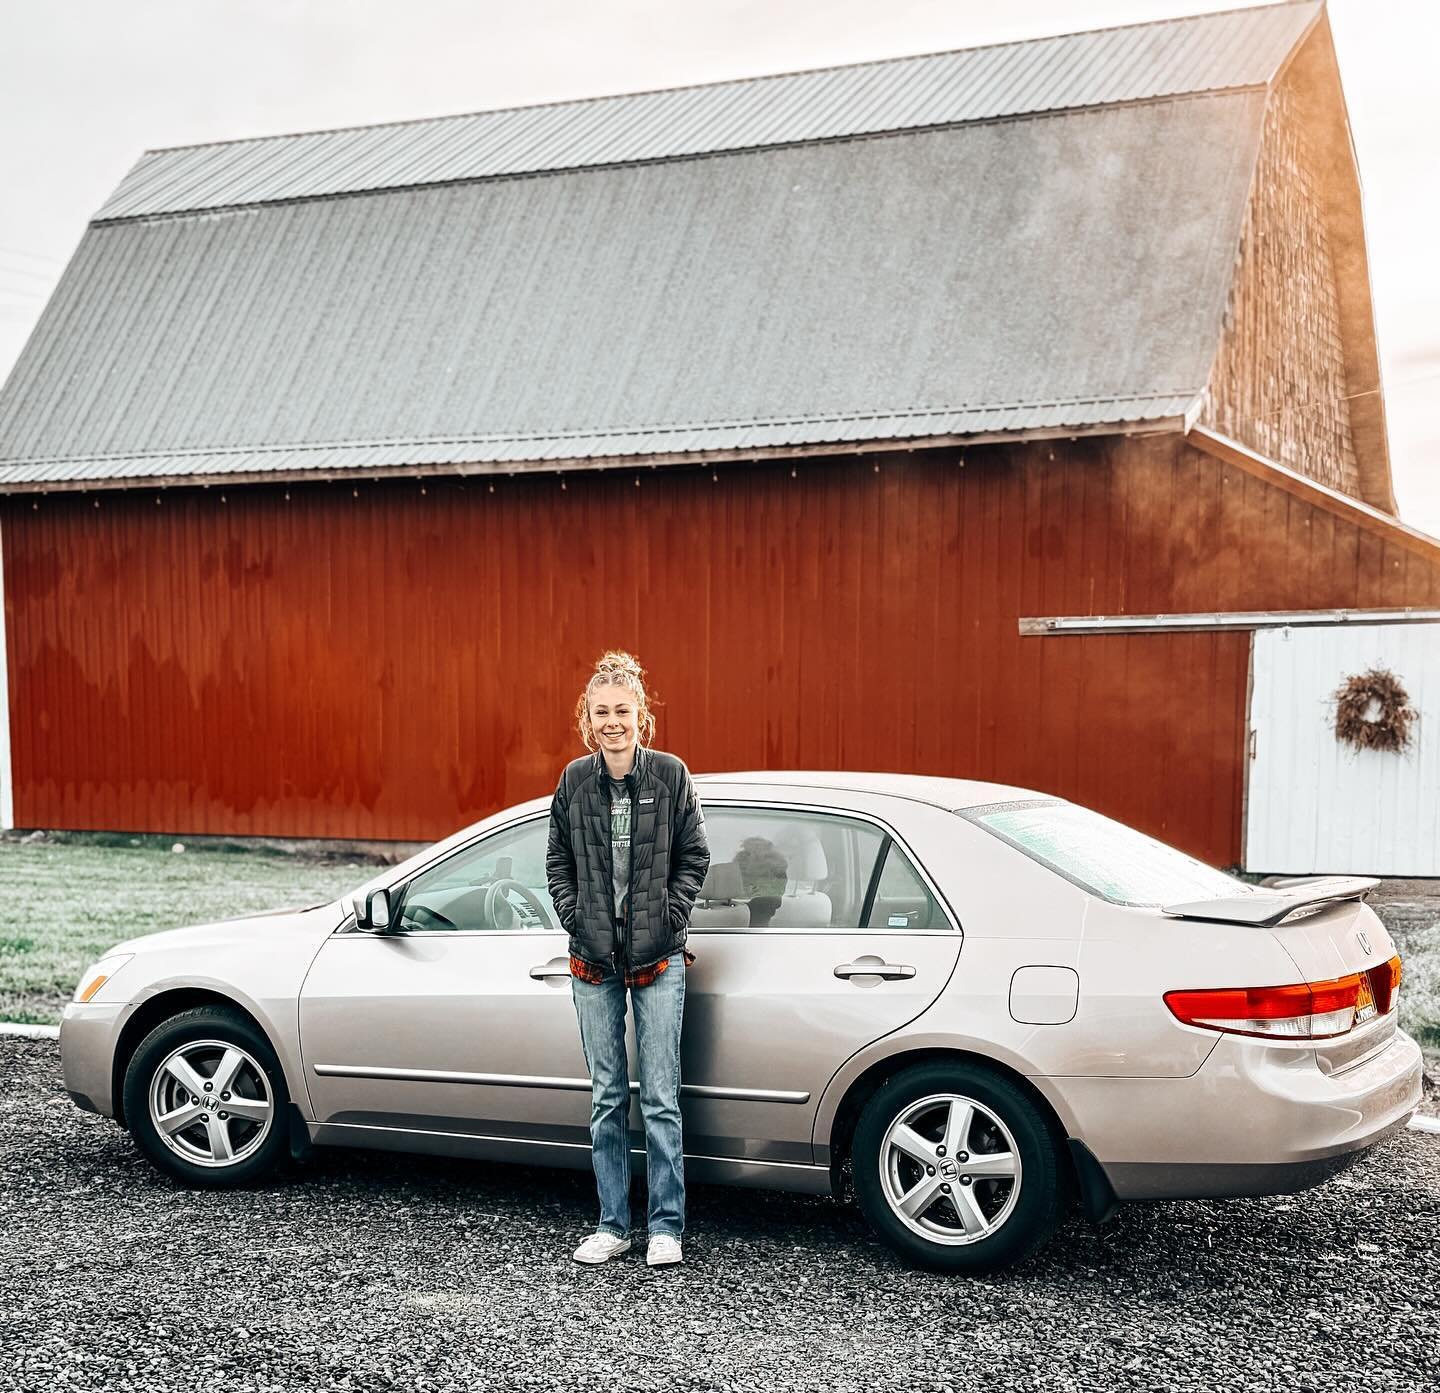 Crazy how in 1 week our oldest buys her first car, our second oldest gets asked to the Spring Formal and our third child gets his braces off!!! What&rsquo;s next?&hellip;..wait and see I guess.

What a week!
.
.
.
.
.
.
#growingup #farmkids #ourlife 